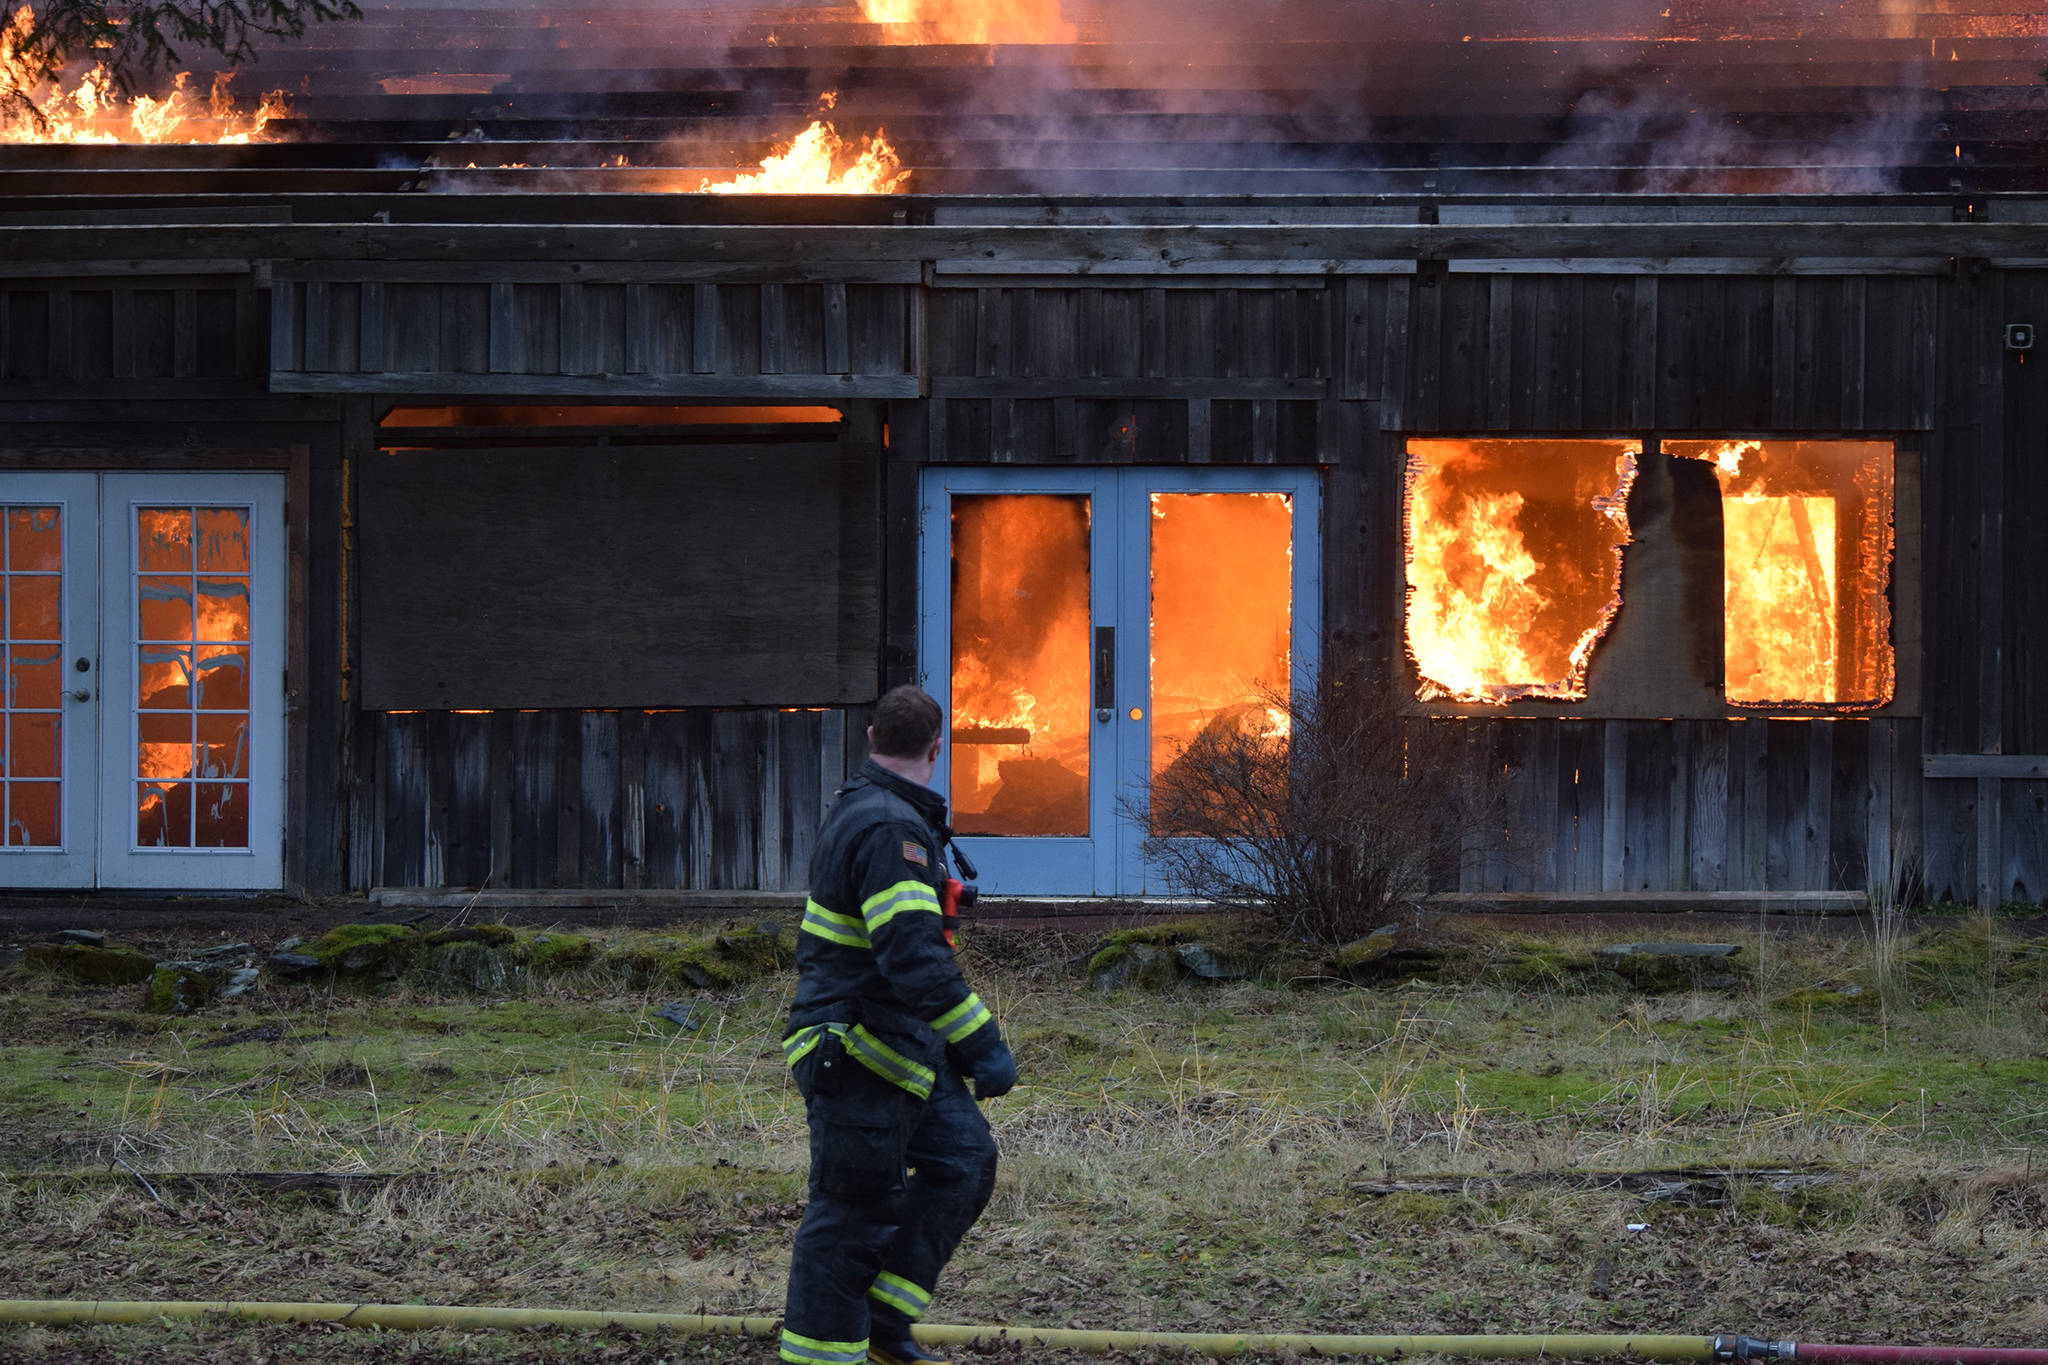 A Capital City Fire/Rescue firefighter walks past the backside of the Thane Ore House during a live fire training exercise on Saturday, Nov. 24, 2018. (Nolin Ainsworth | Juneau Empire)